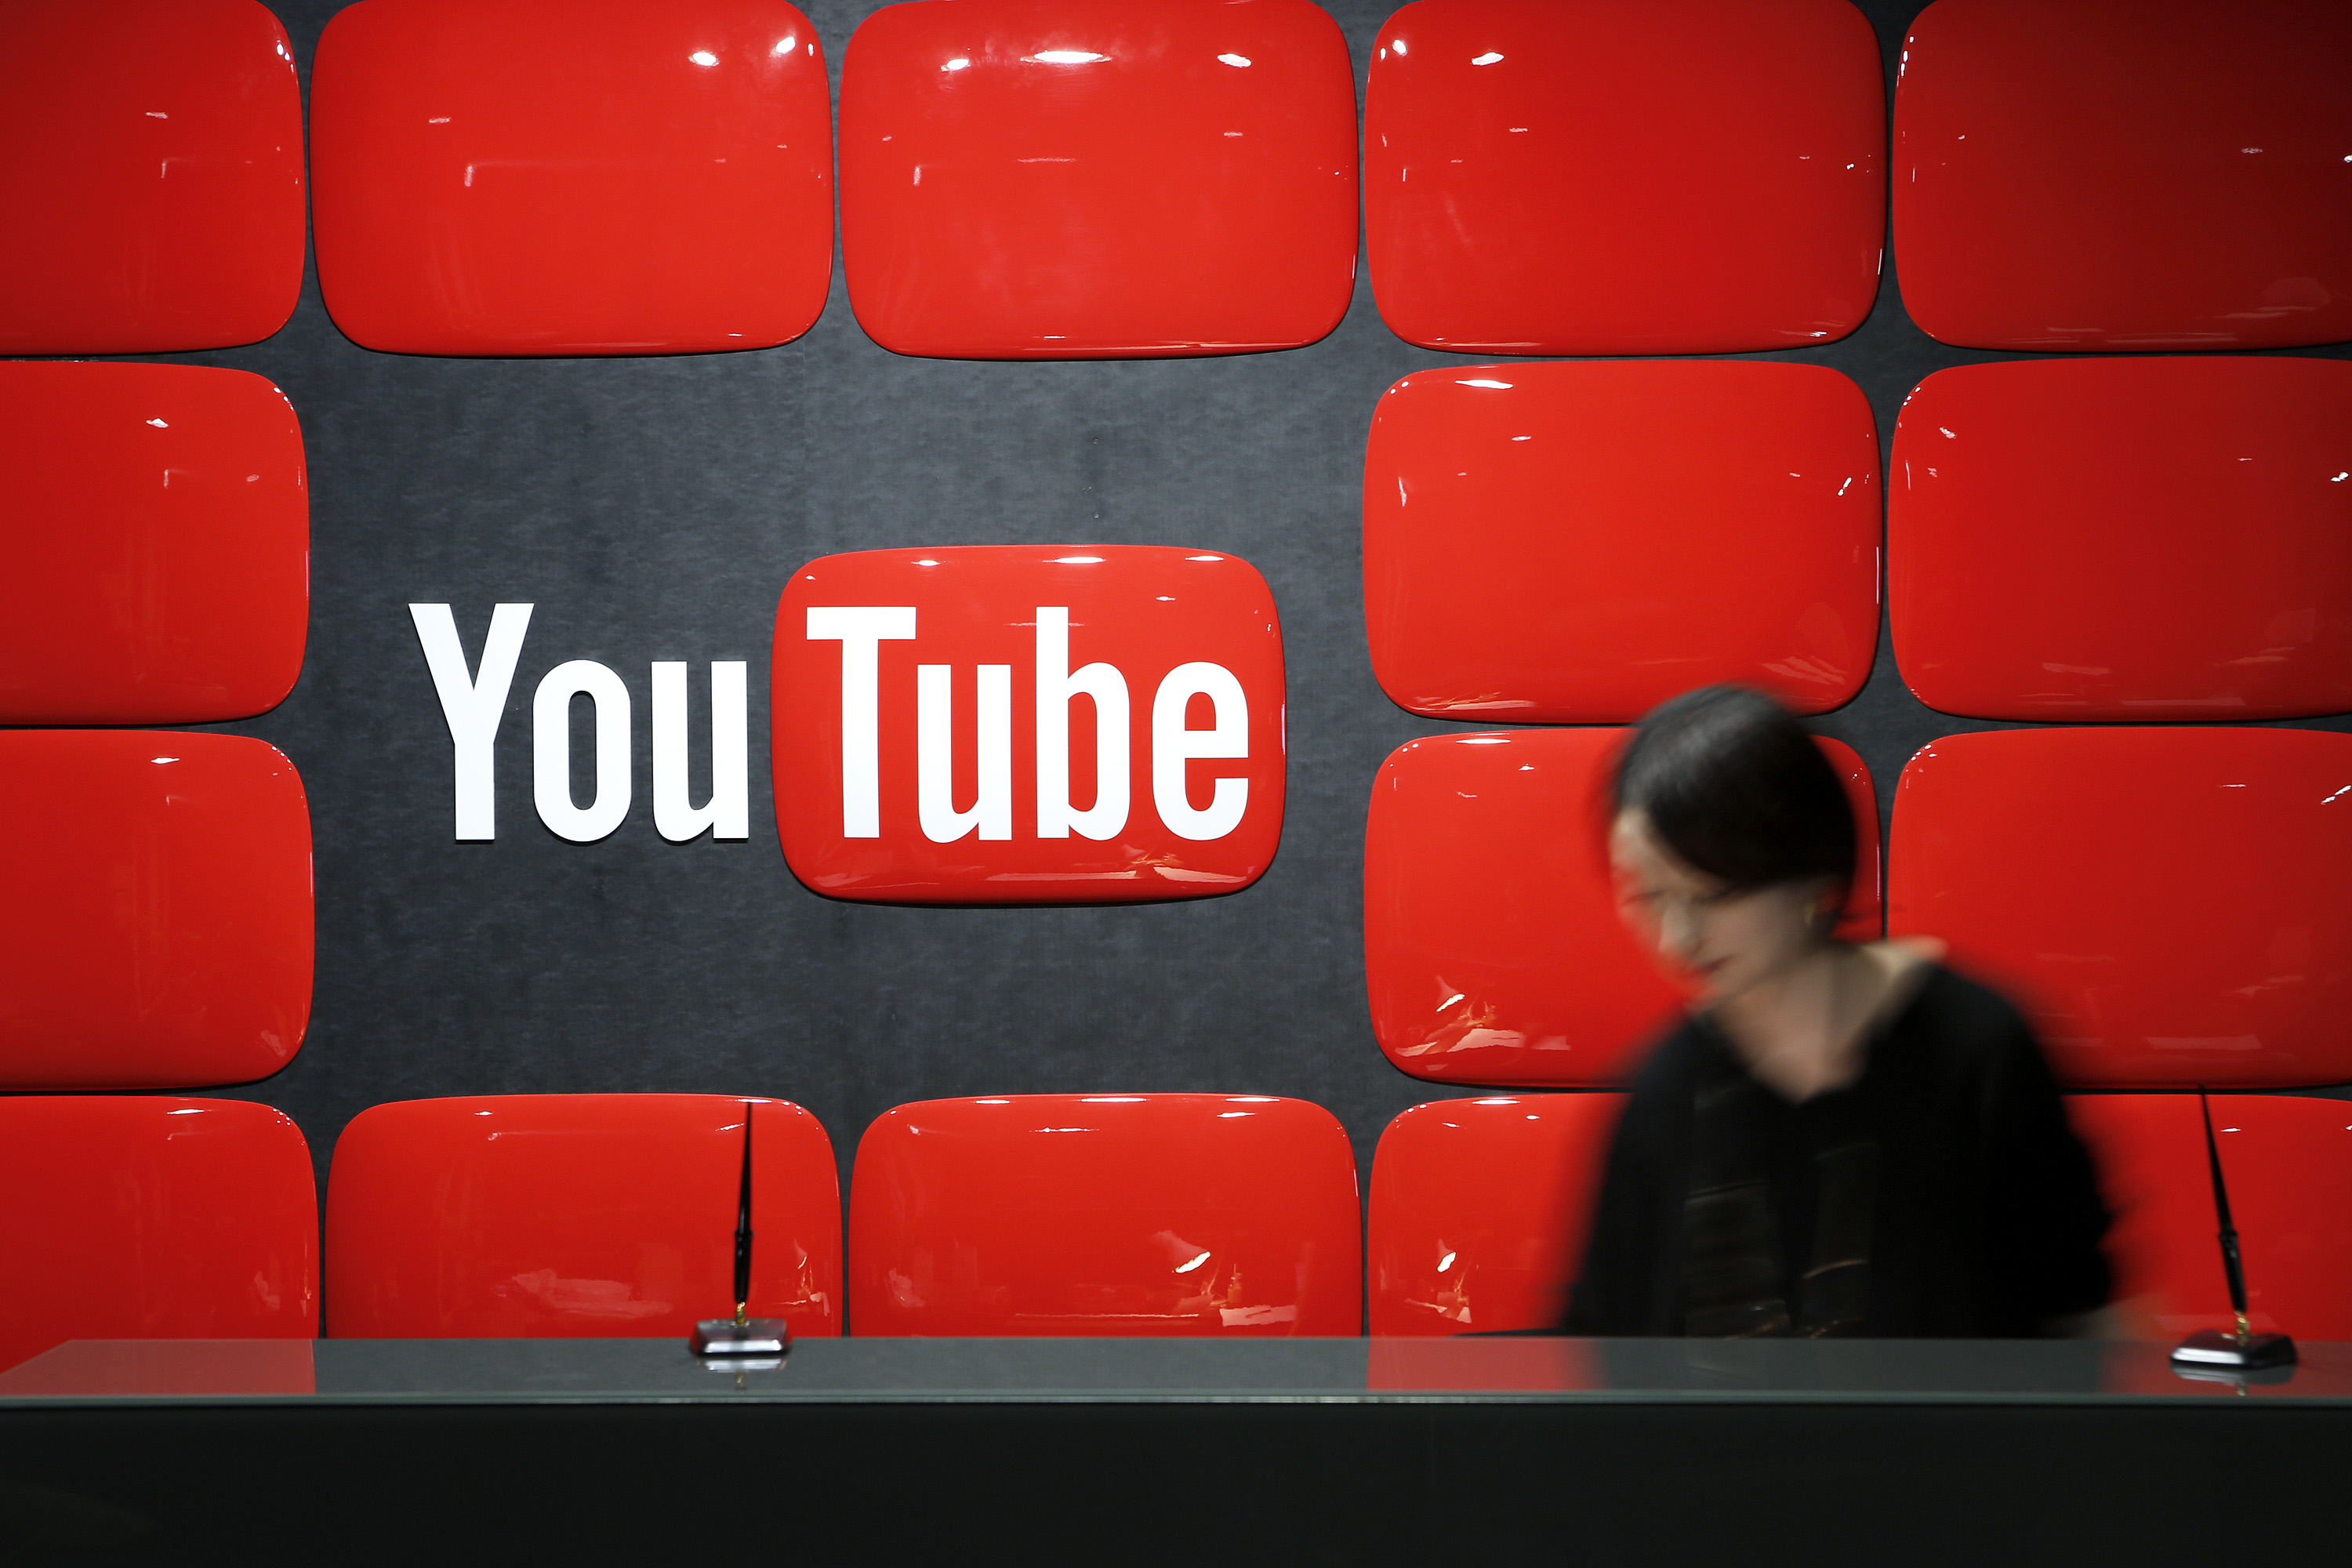 Google Inc.'s YouTube logo is displayed behind the reception desk at the company's YouTube Space studio in Tokyo, on March 30, 2013.